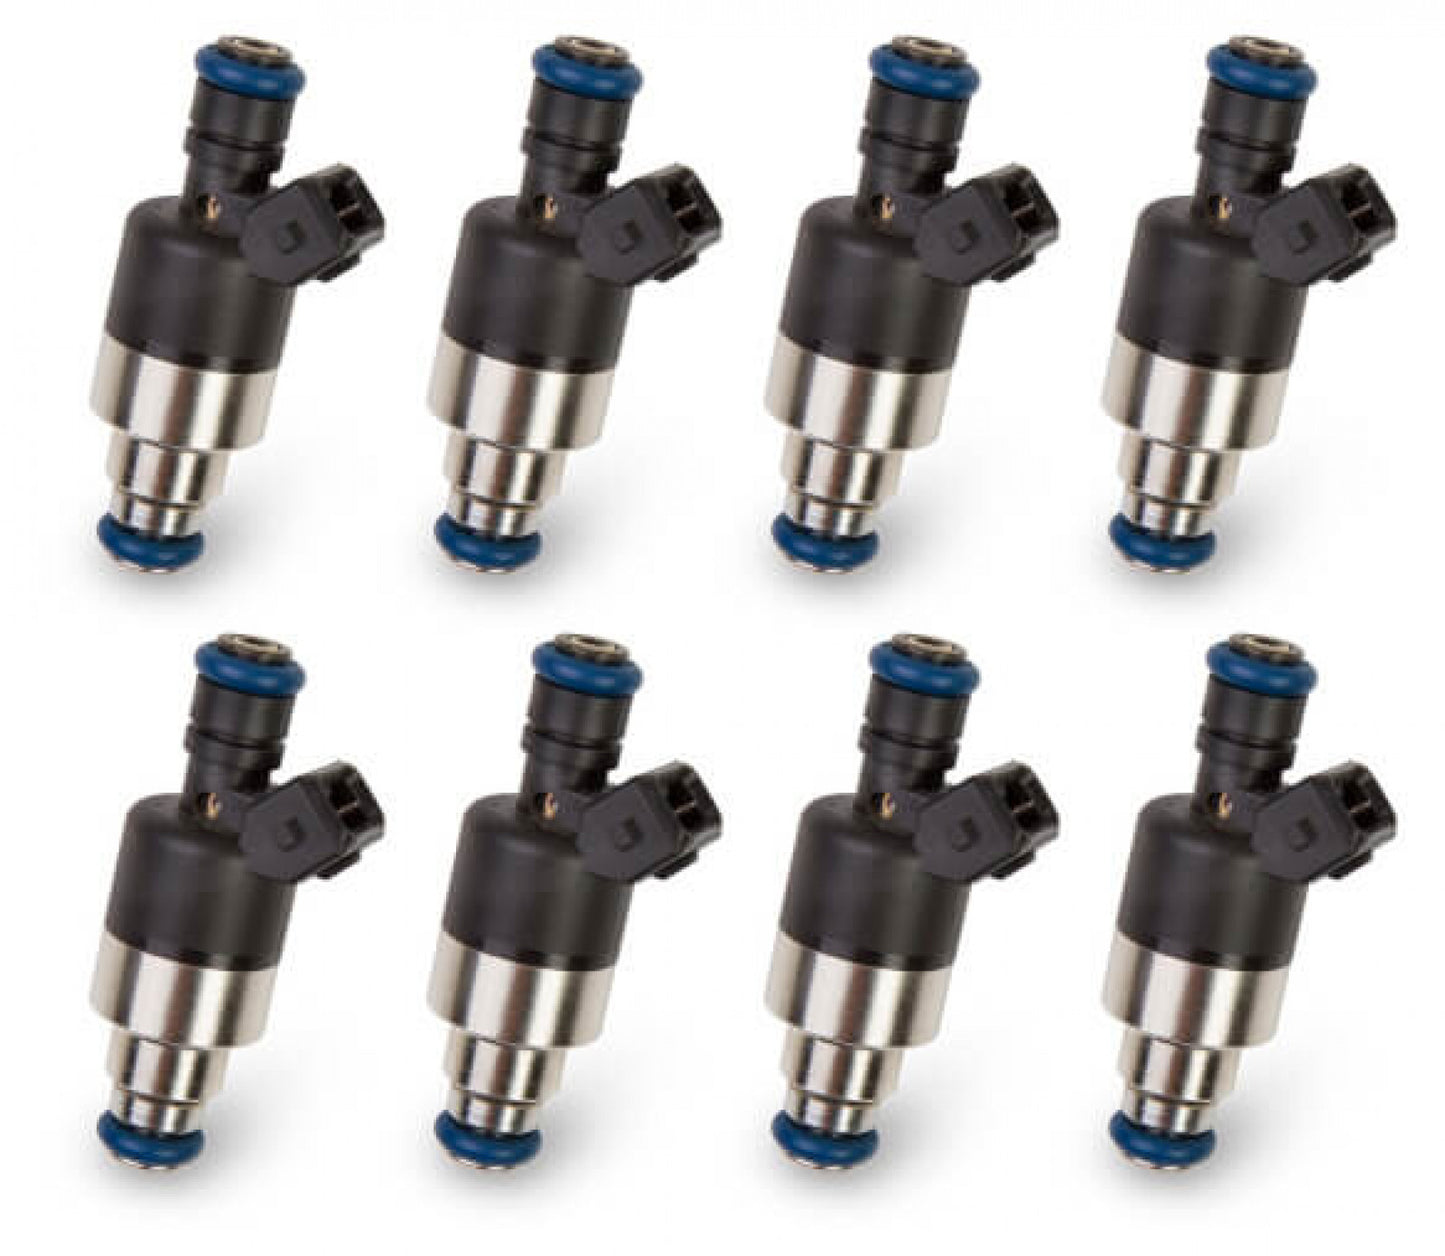 Holley EFI Performance Fuel Injectors - Set of Eight 522-488